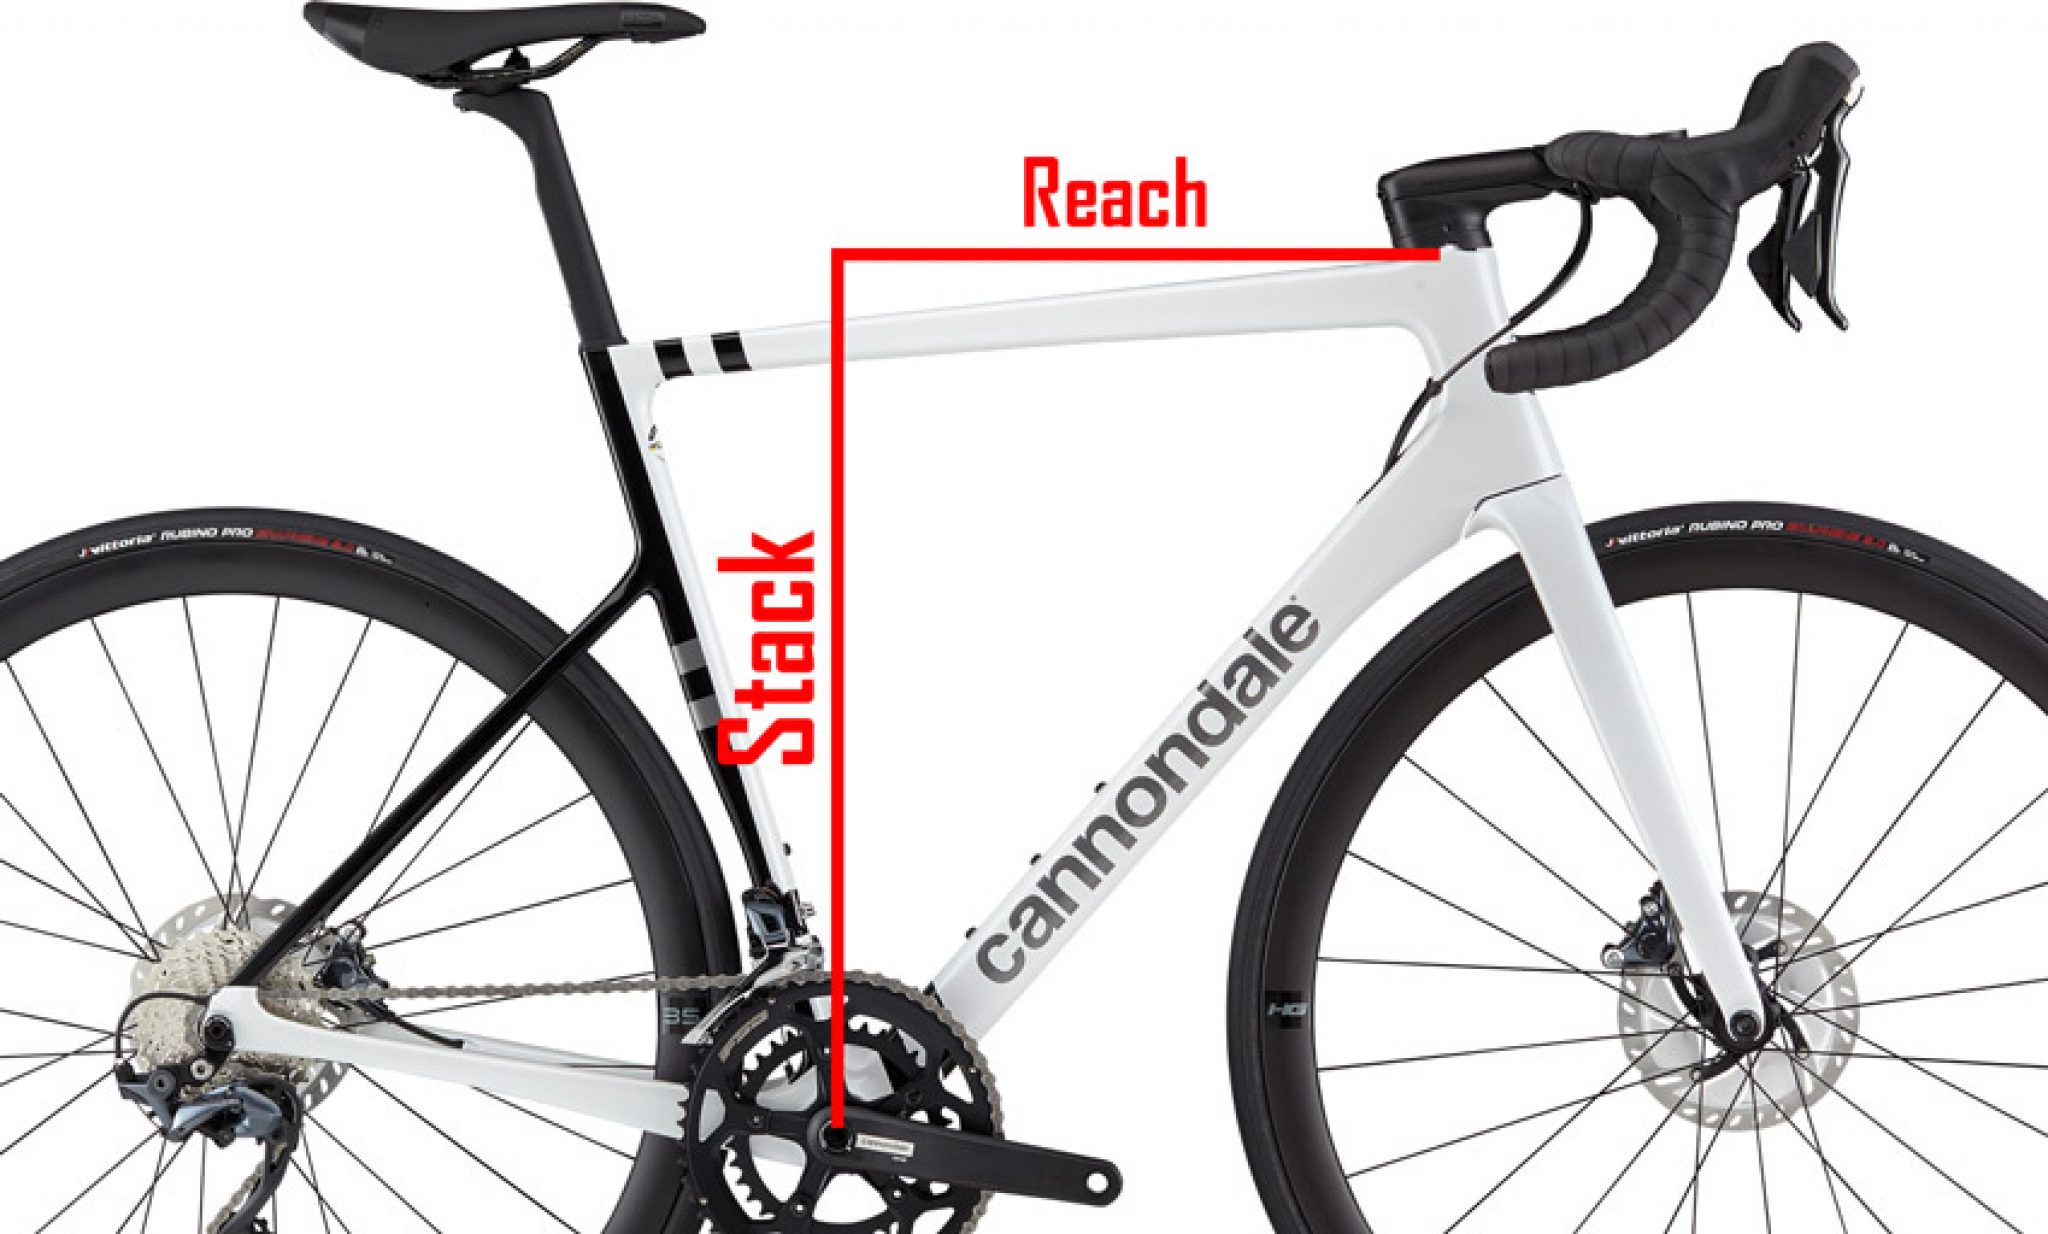 How To Measure A Bike Frame An Easy Comprehensive Guide